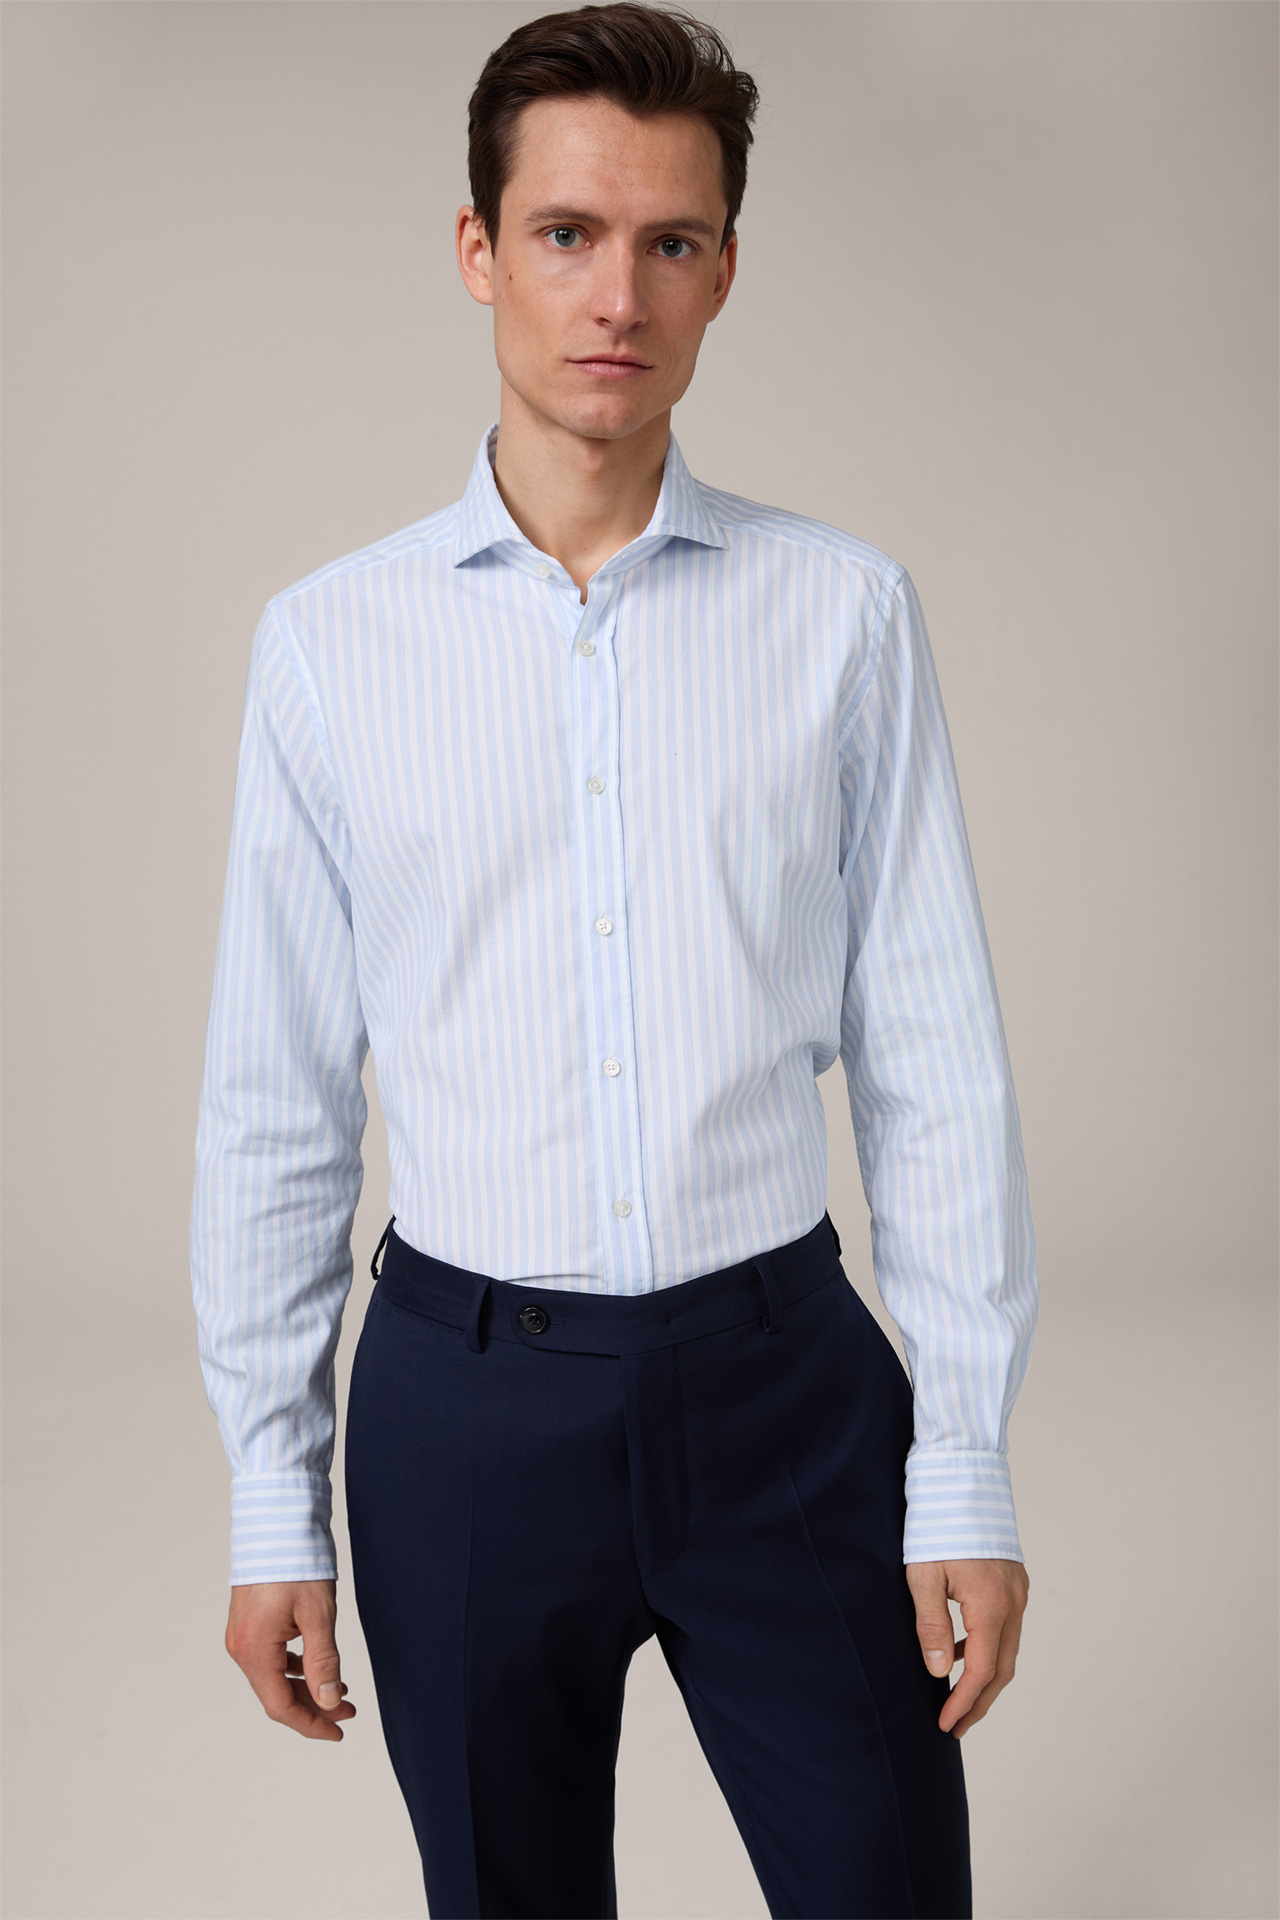 Trivo Cotton Shirt in Light Blue and White Striped